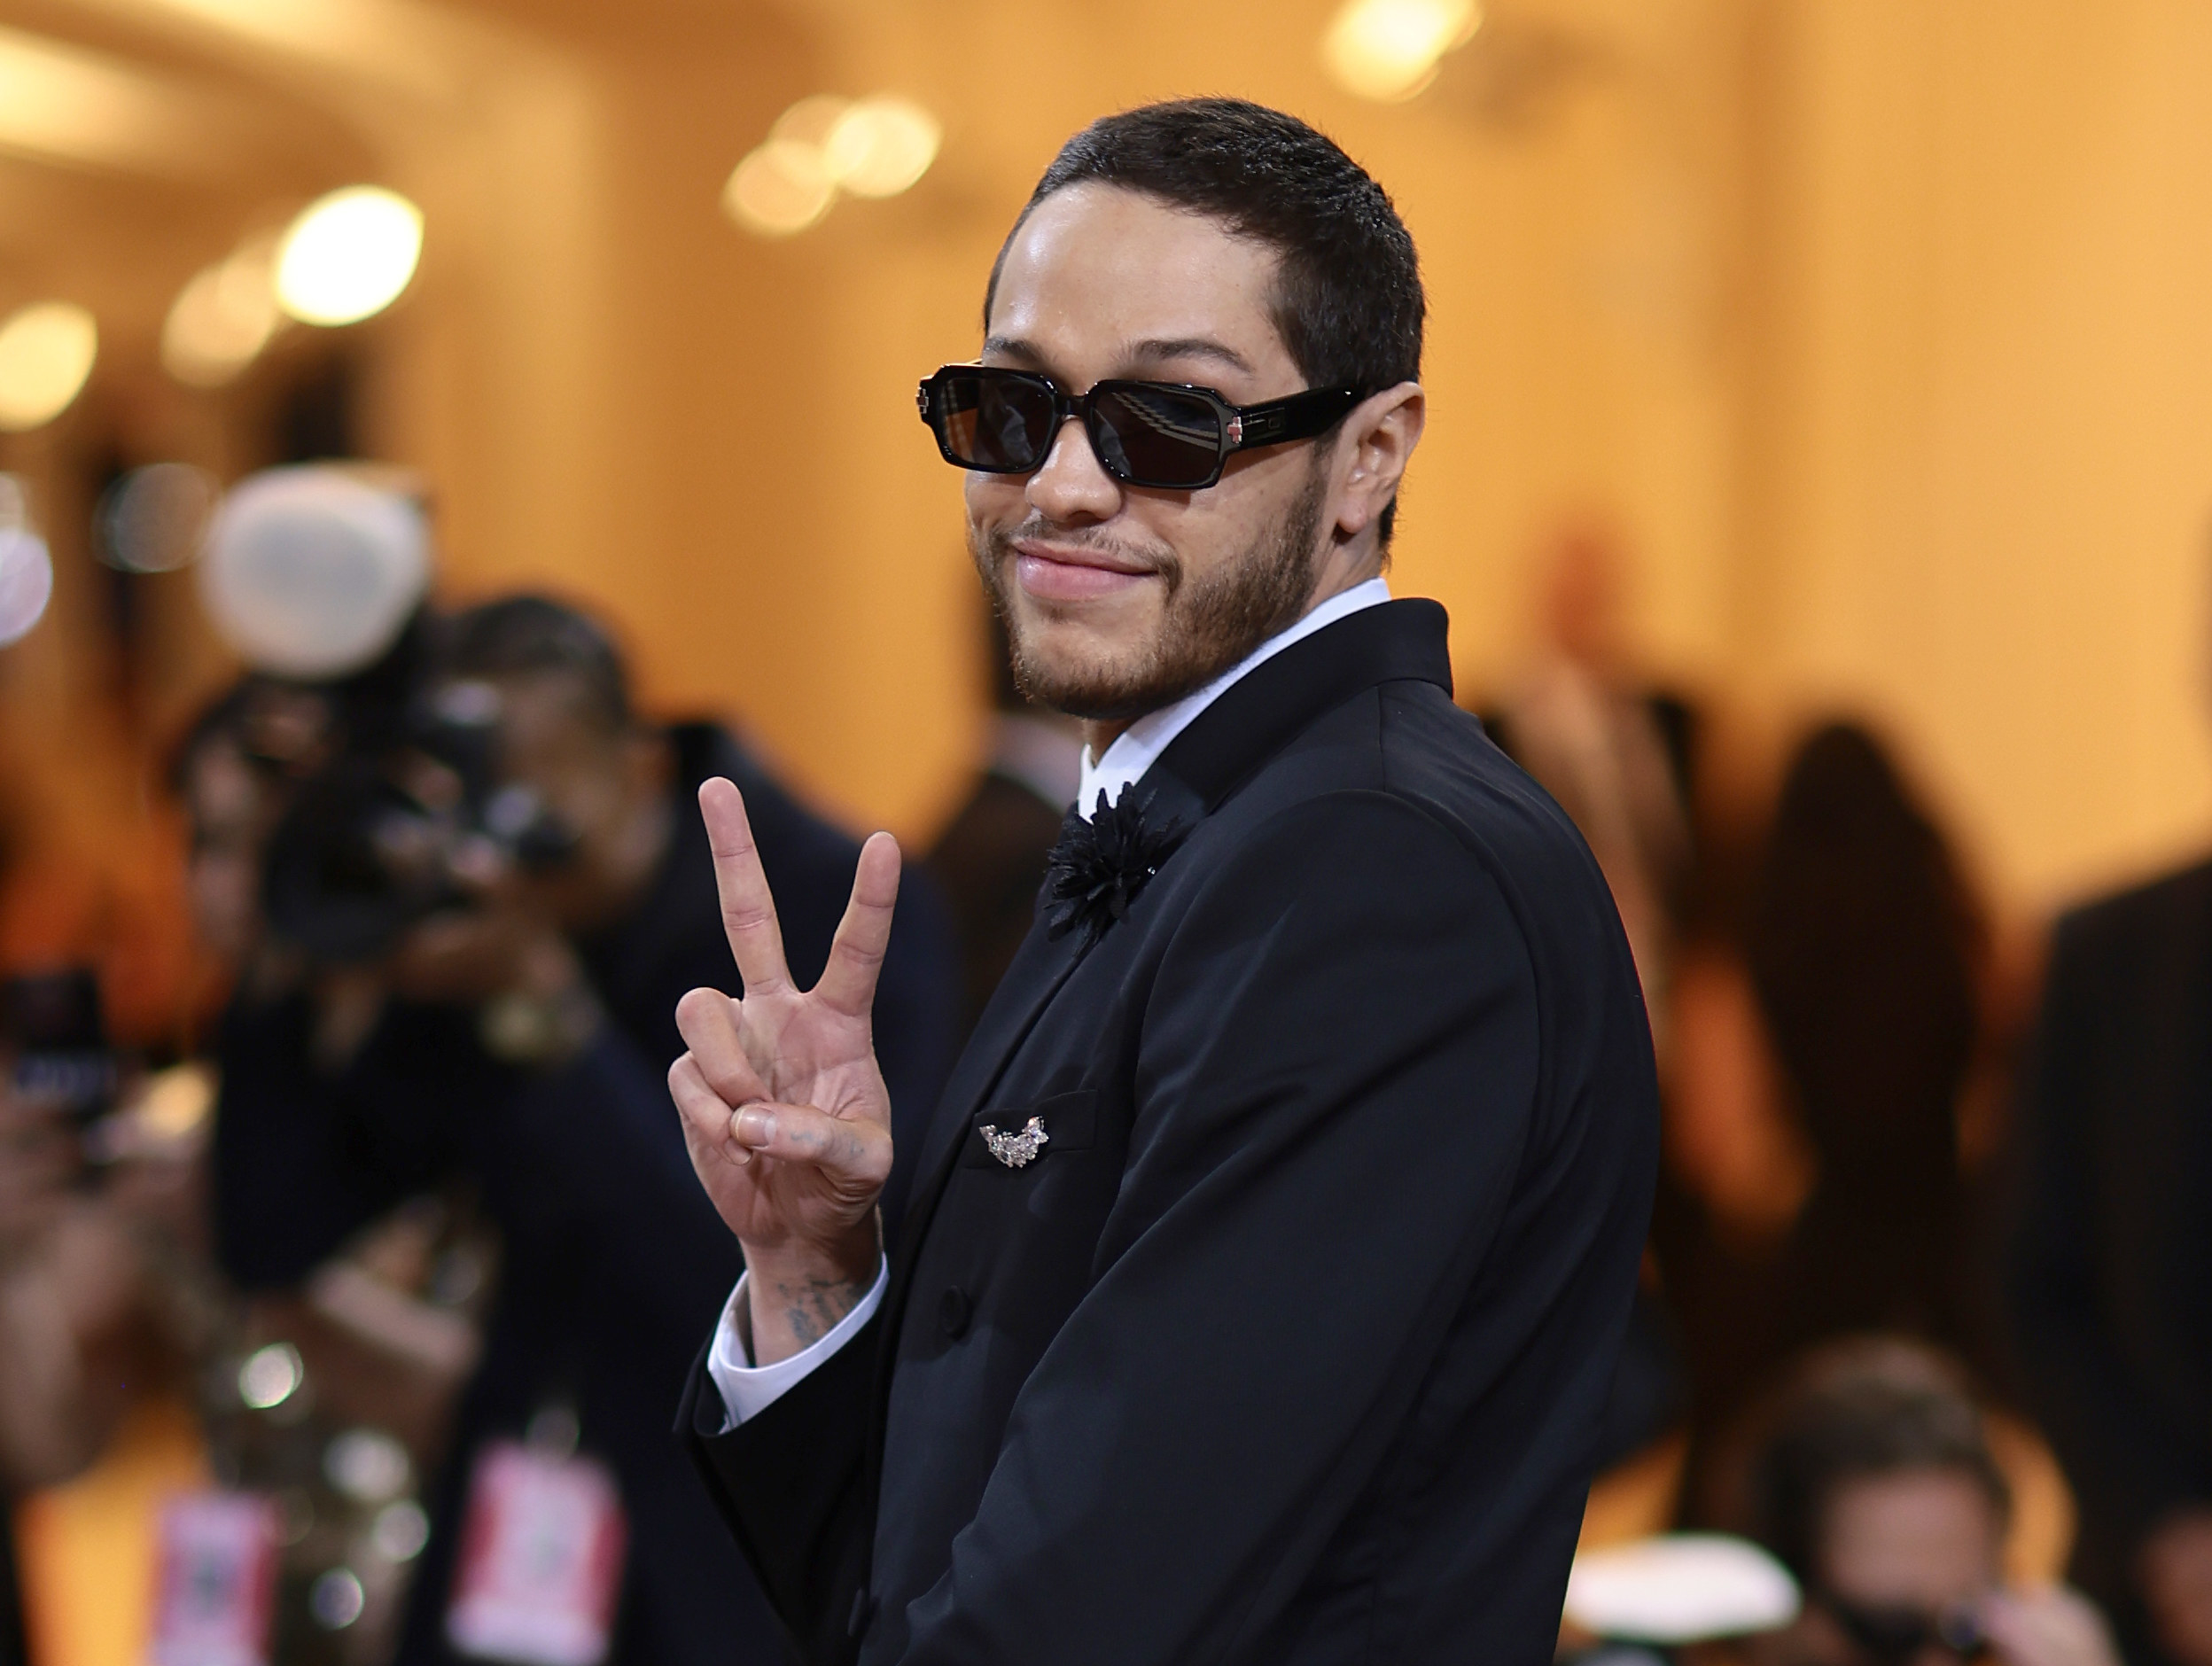 Pete Davidson wears sunglasses and gives a peace sign at the Met Gala